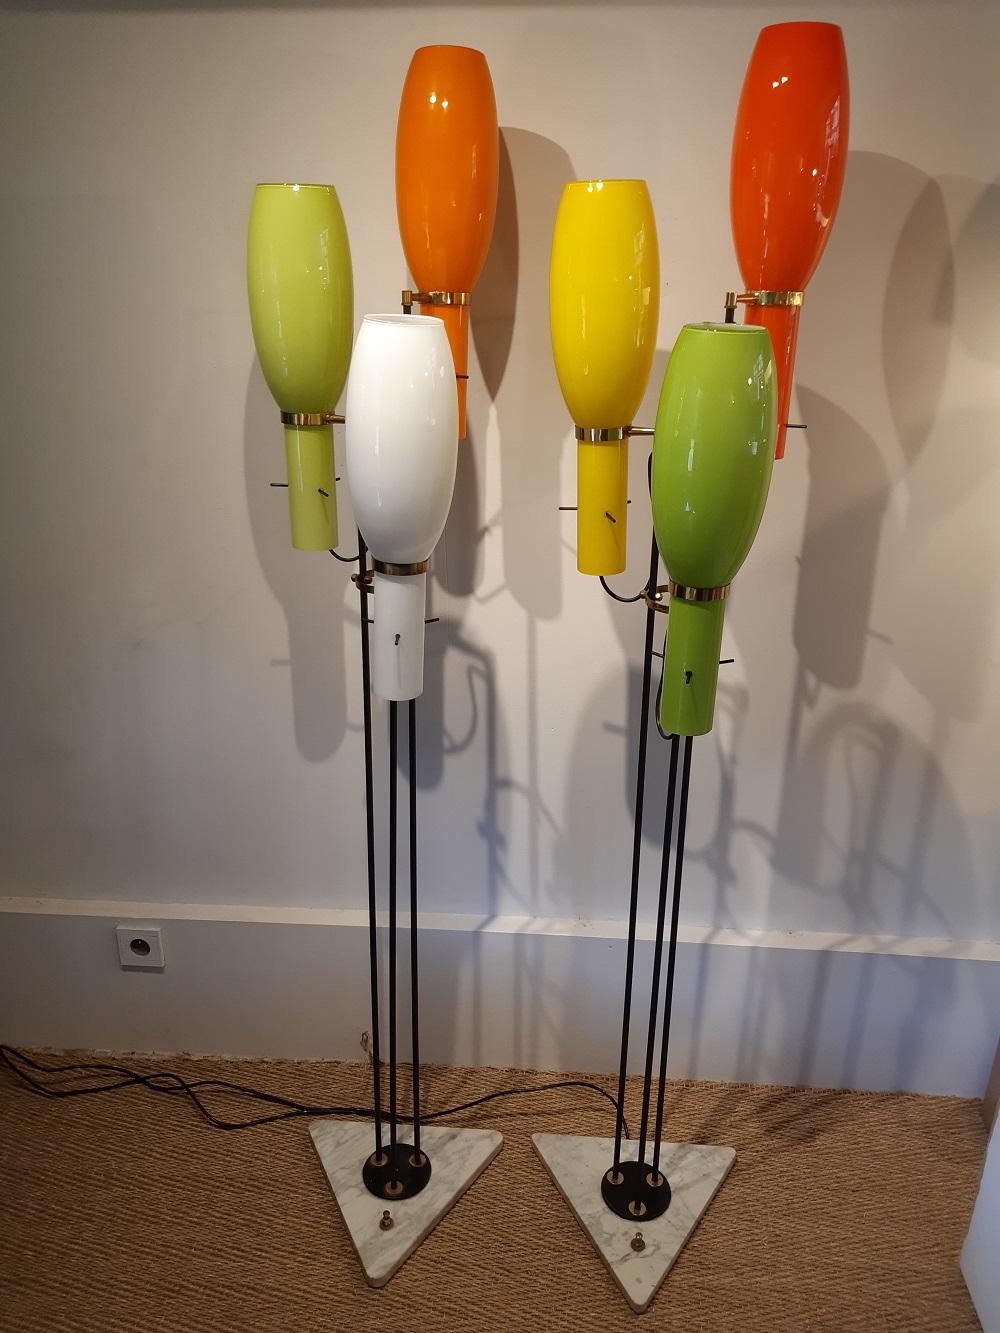 Italian midcentury Stilnovo floor lamp 1950s metal, glass and marble.
Switch on the marble base.
There is a pair available, the price is for one
Both are different. There is one with 3 pale colors: white, green and orange.
On the other floor